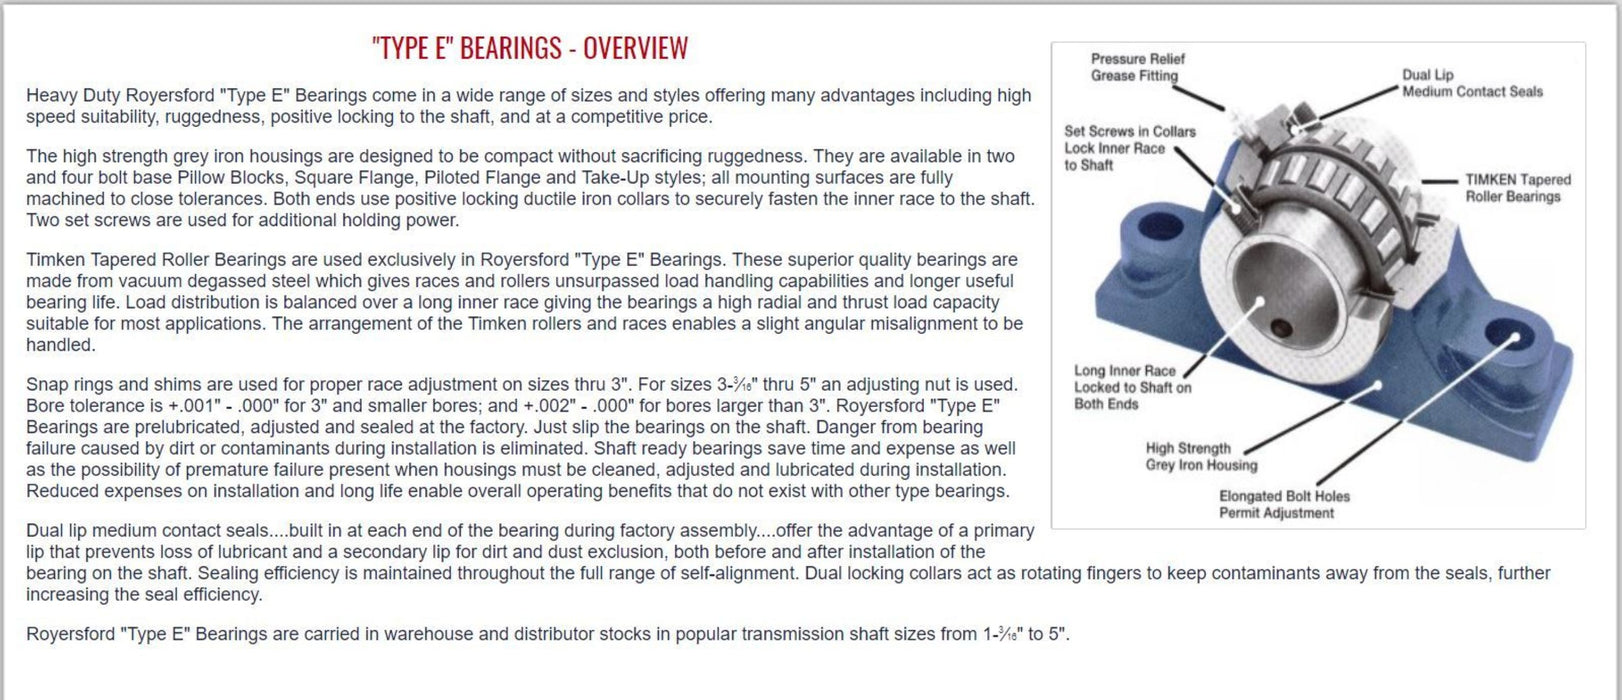 20-04-0303, Royersford Type E 4-Bolt Pillow Block Bearing, 3-3/16" with Timken Tapered Roller Bearings